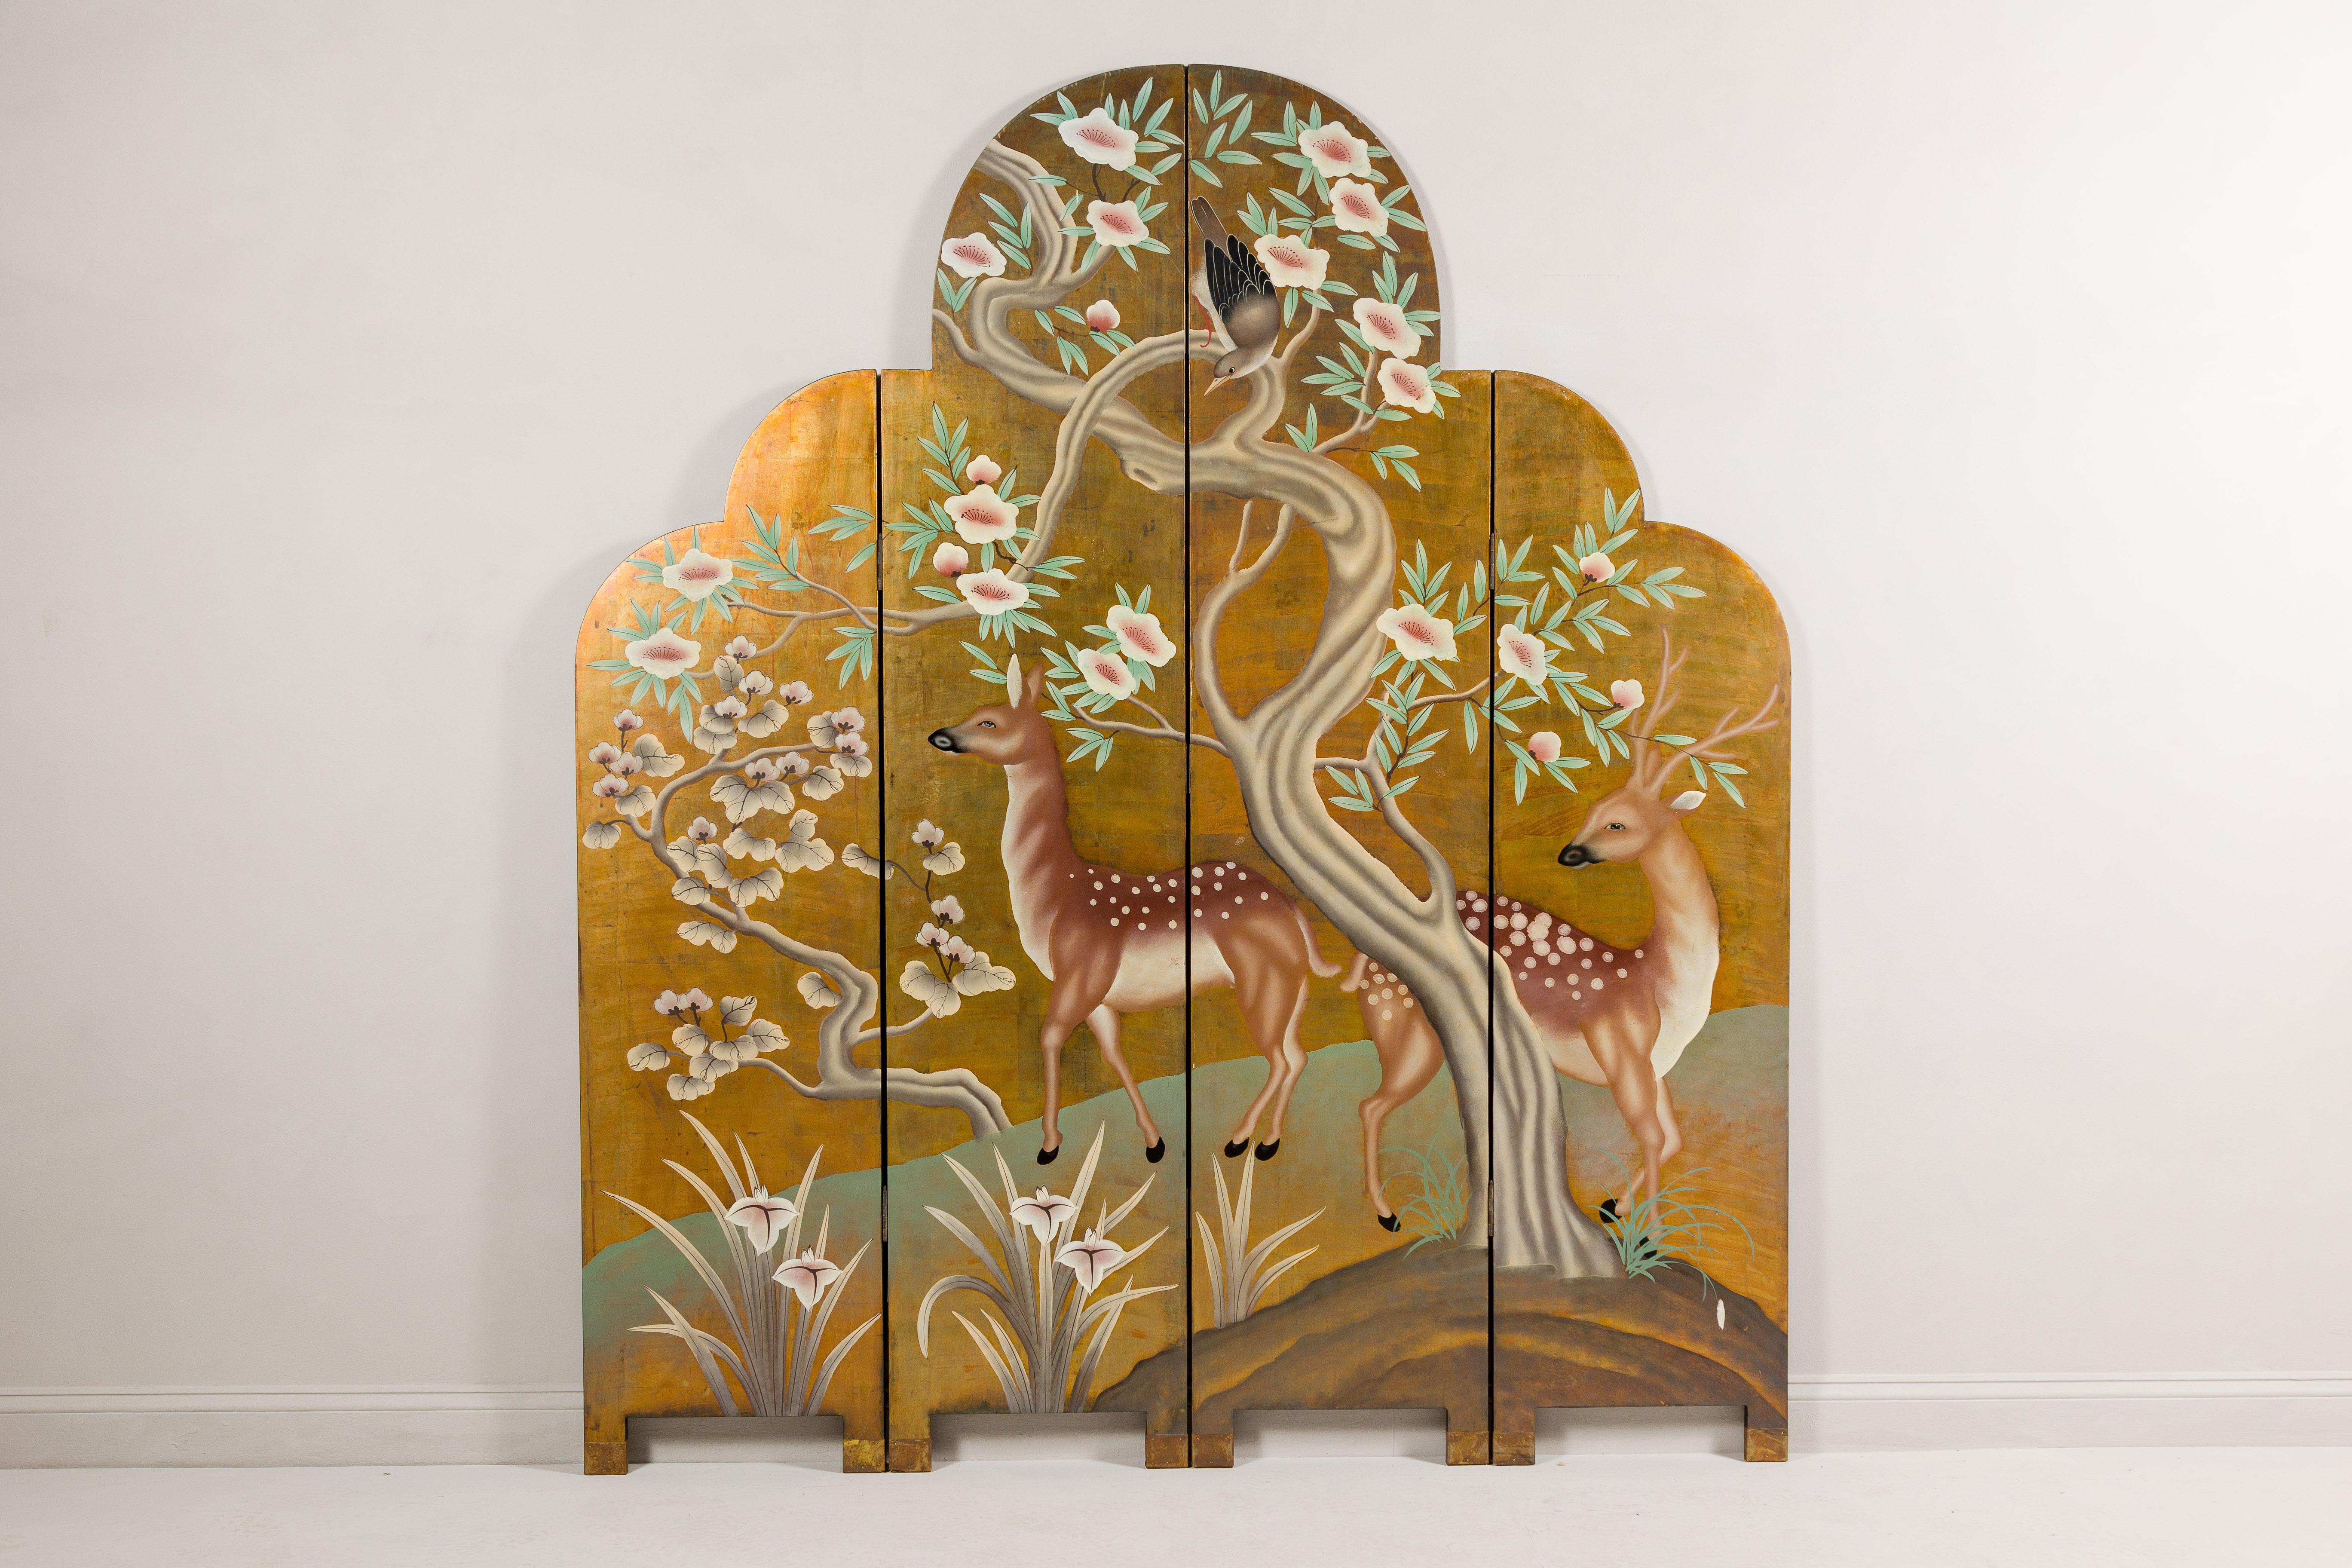 A vintage four-panel gilded wood screen adorned with deer, bird, trees and flowers. This vintage four-panel gilded wood screen is a stunning work of art that transports you into a serene natural landscape. Each panel is a masterpiece, participating